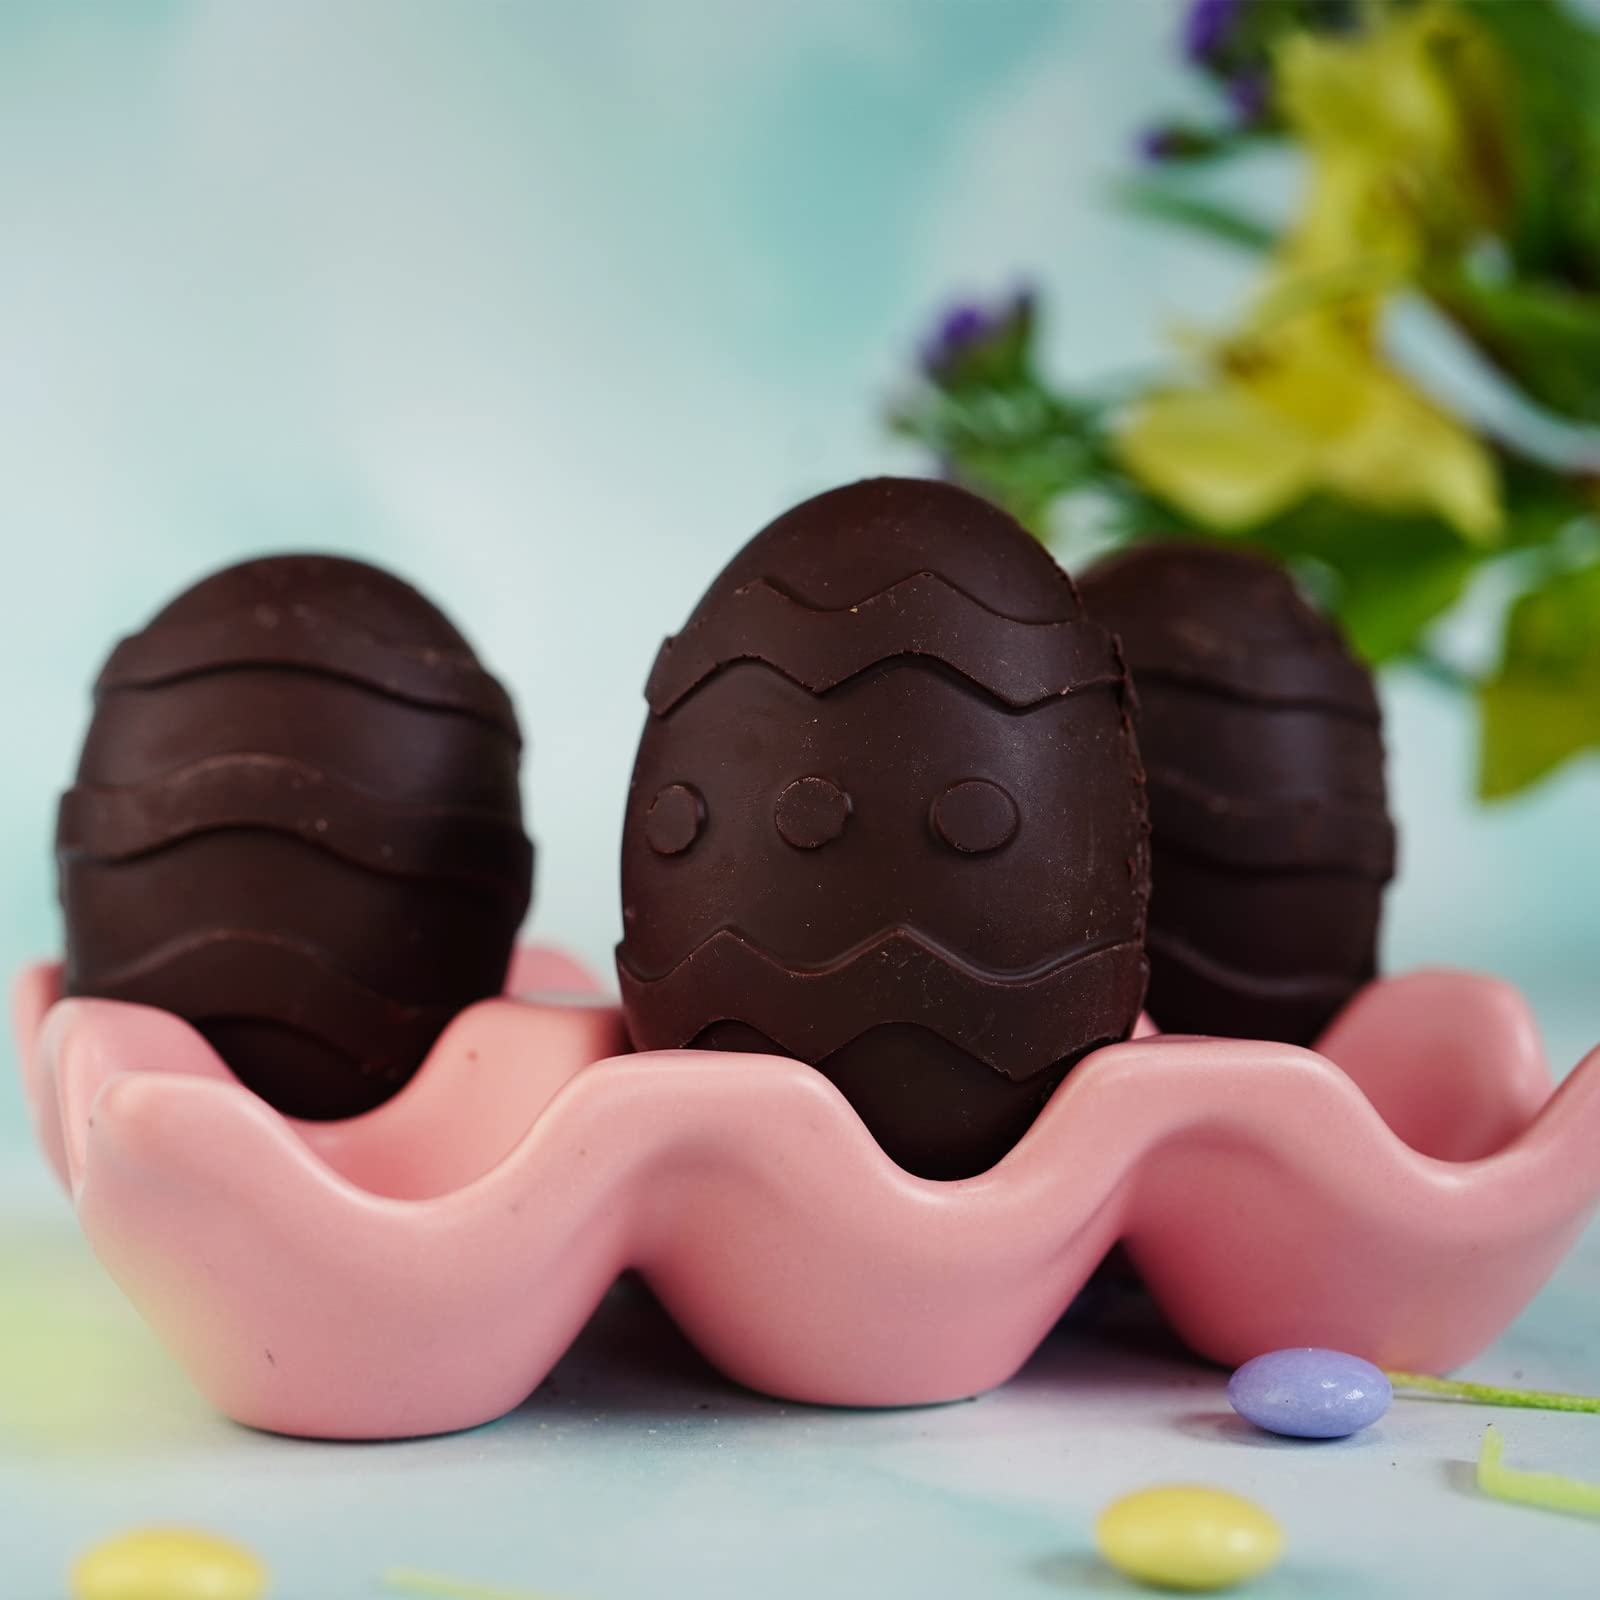 Easter Egg Silicone Mold Easter Bunny Silicon Molds for Chocolate 4 Packs Egg Shaped Mold Baking Pan Resin Cake Chocolate Mold Silicone Candy Pan for Easter Party